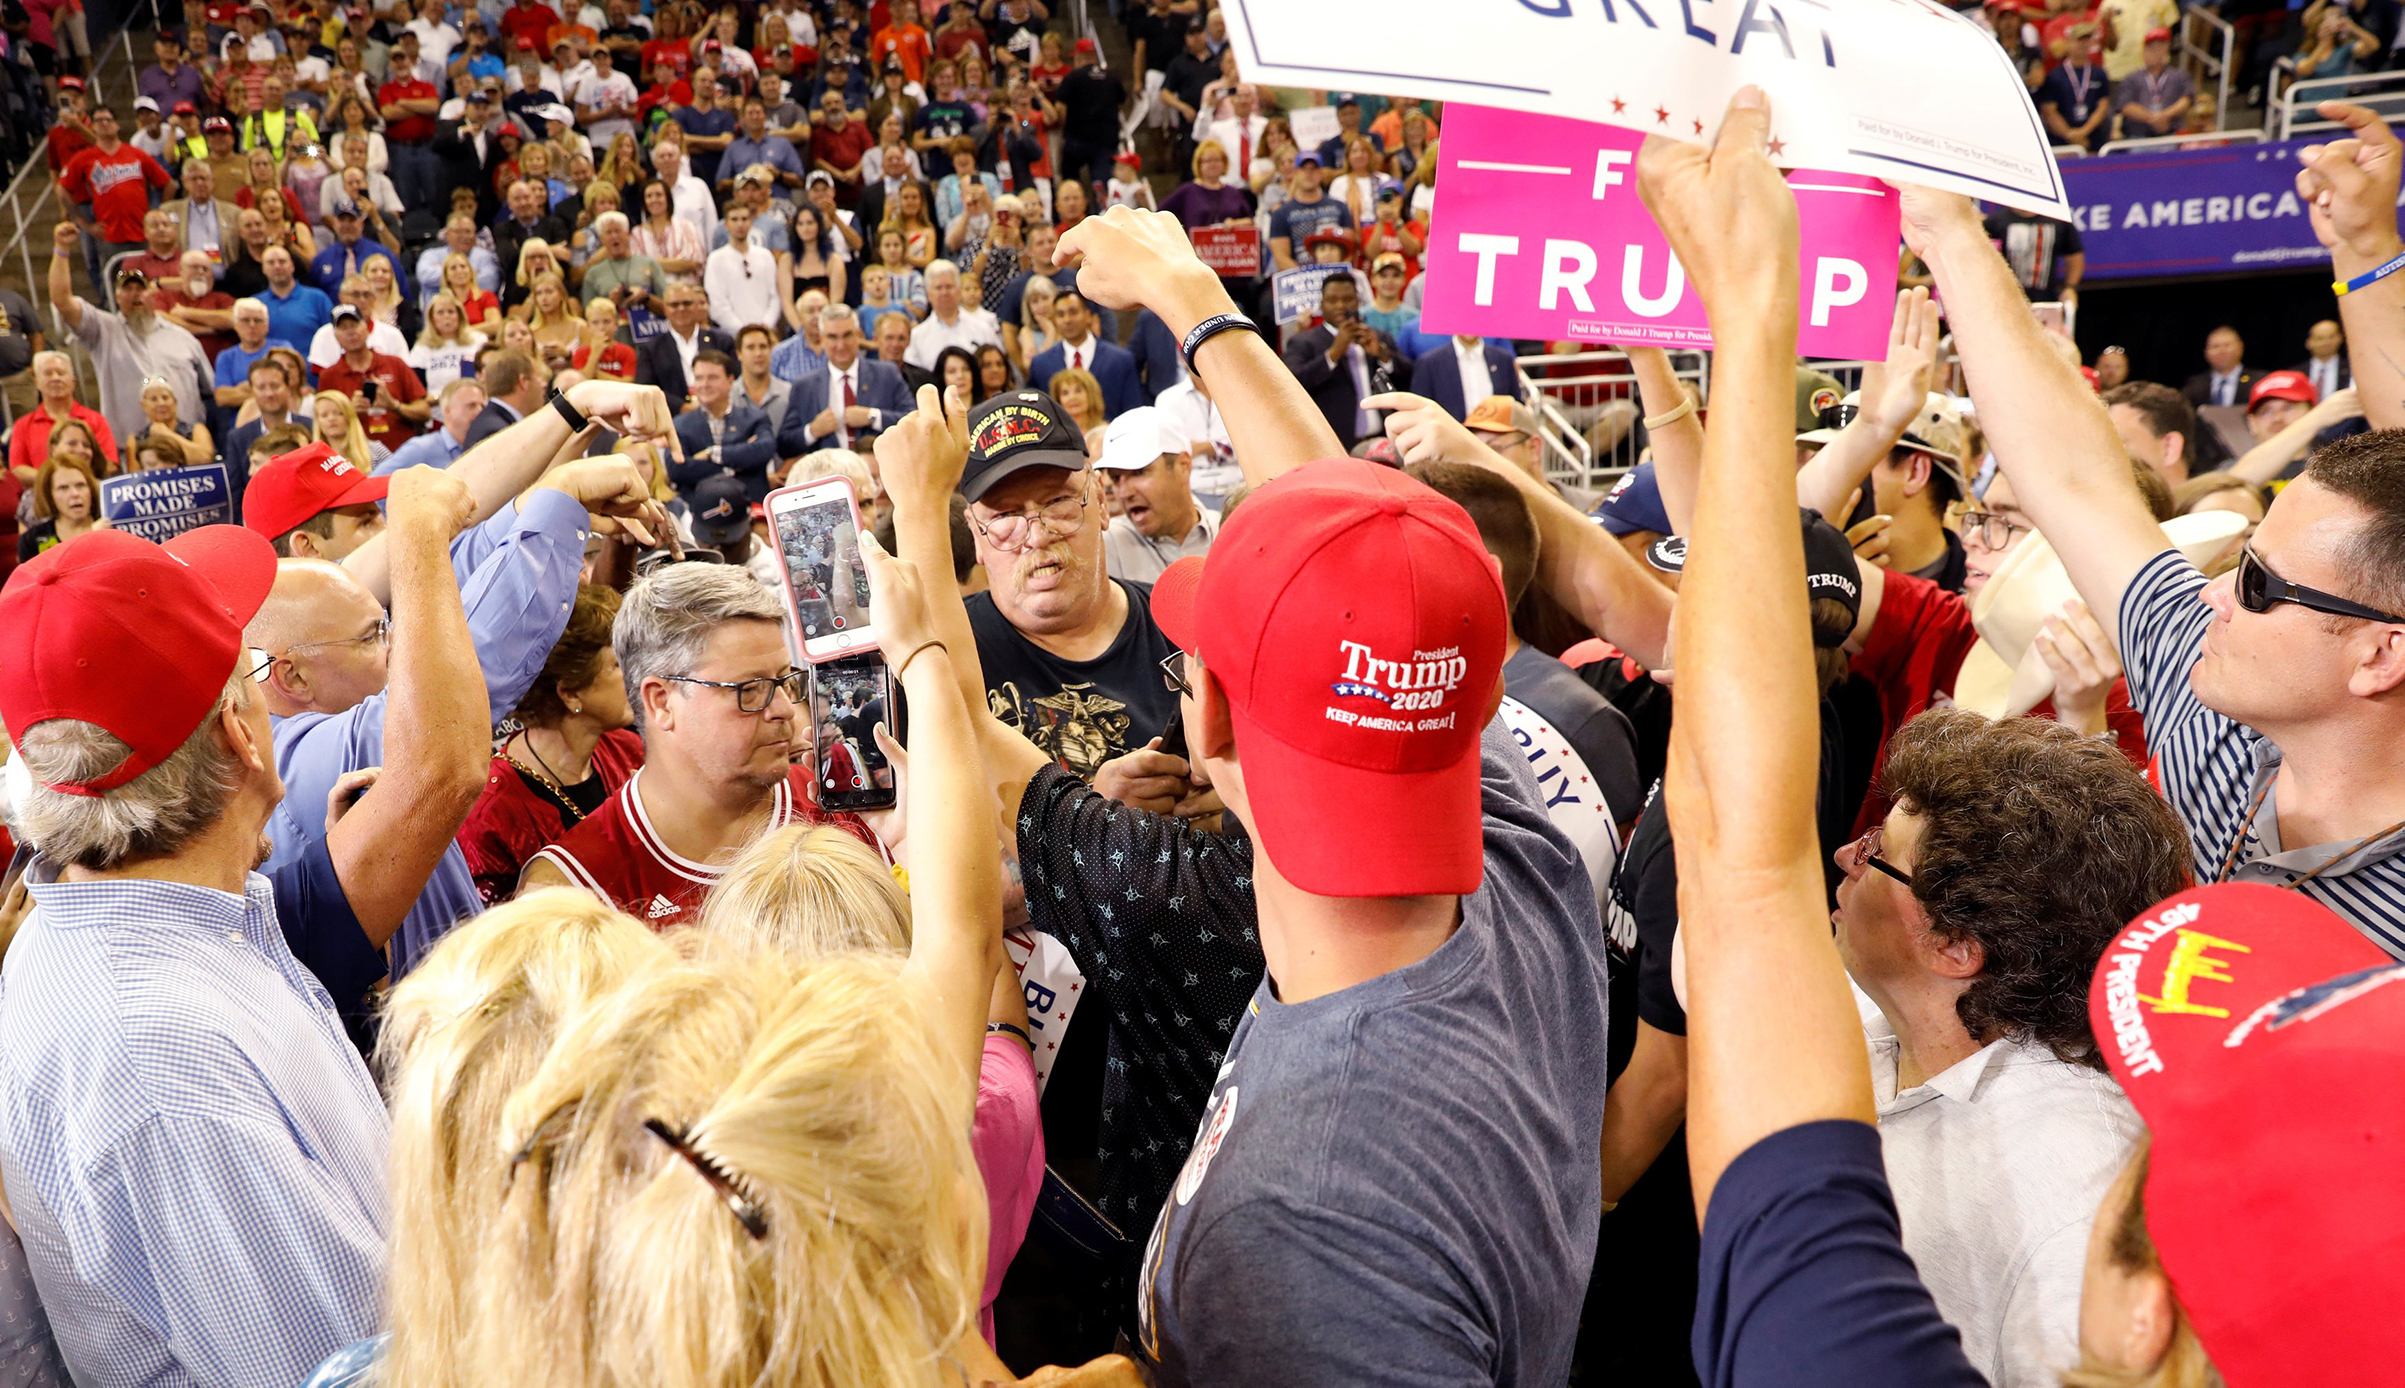 Trump supporters point out a protester to be removed during President Trump's "Make America Great Again" rally in Evansville, Ind, August 30, 2018. (Kevin Lamarque—Reuters)